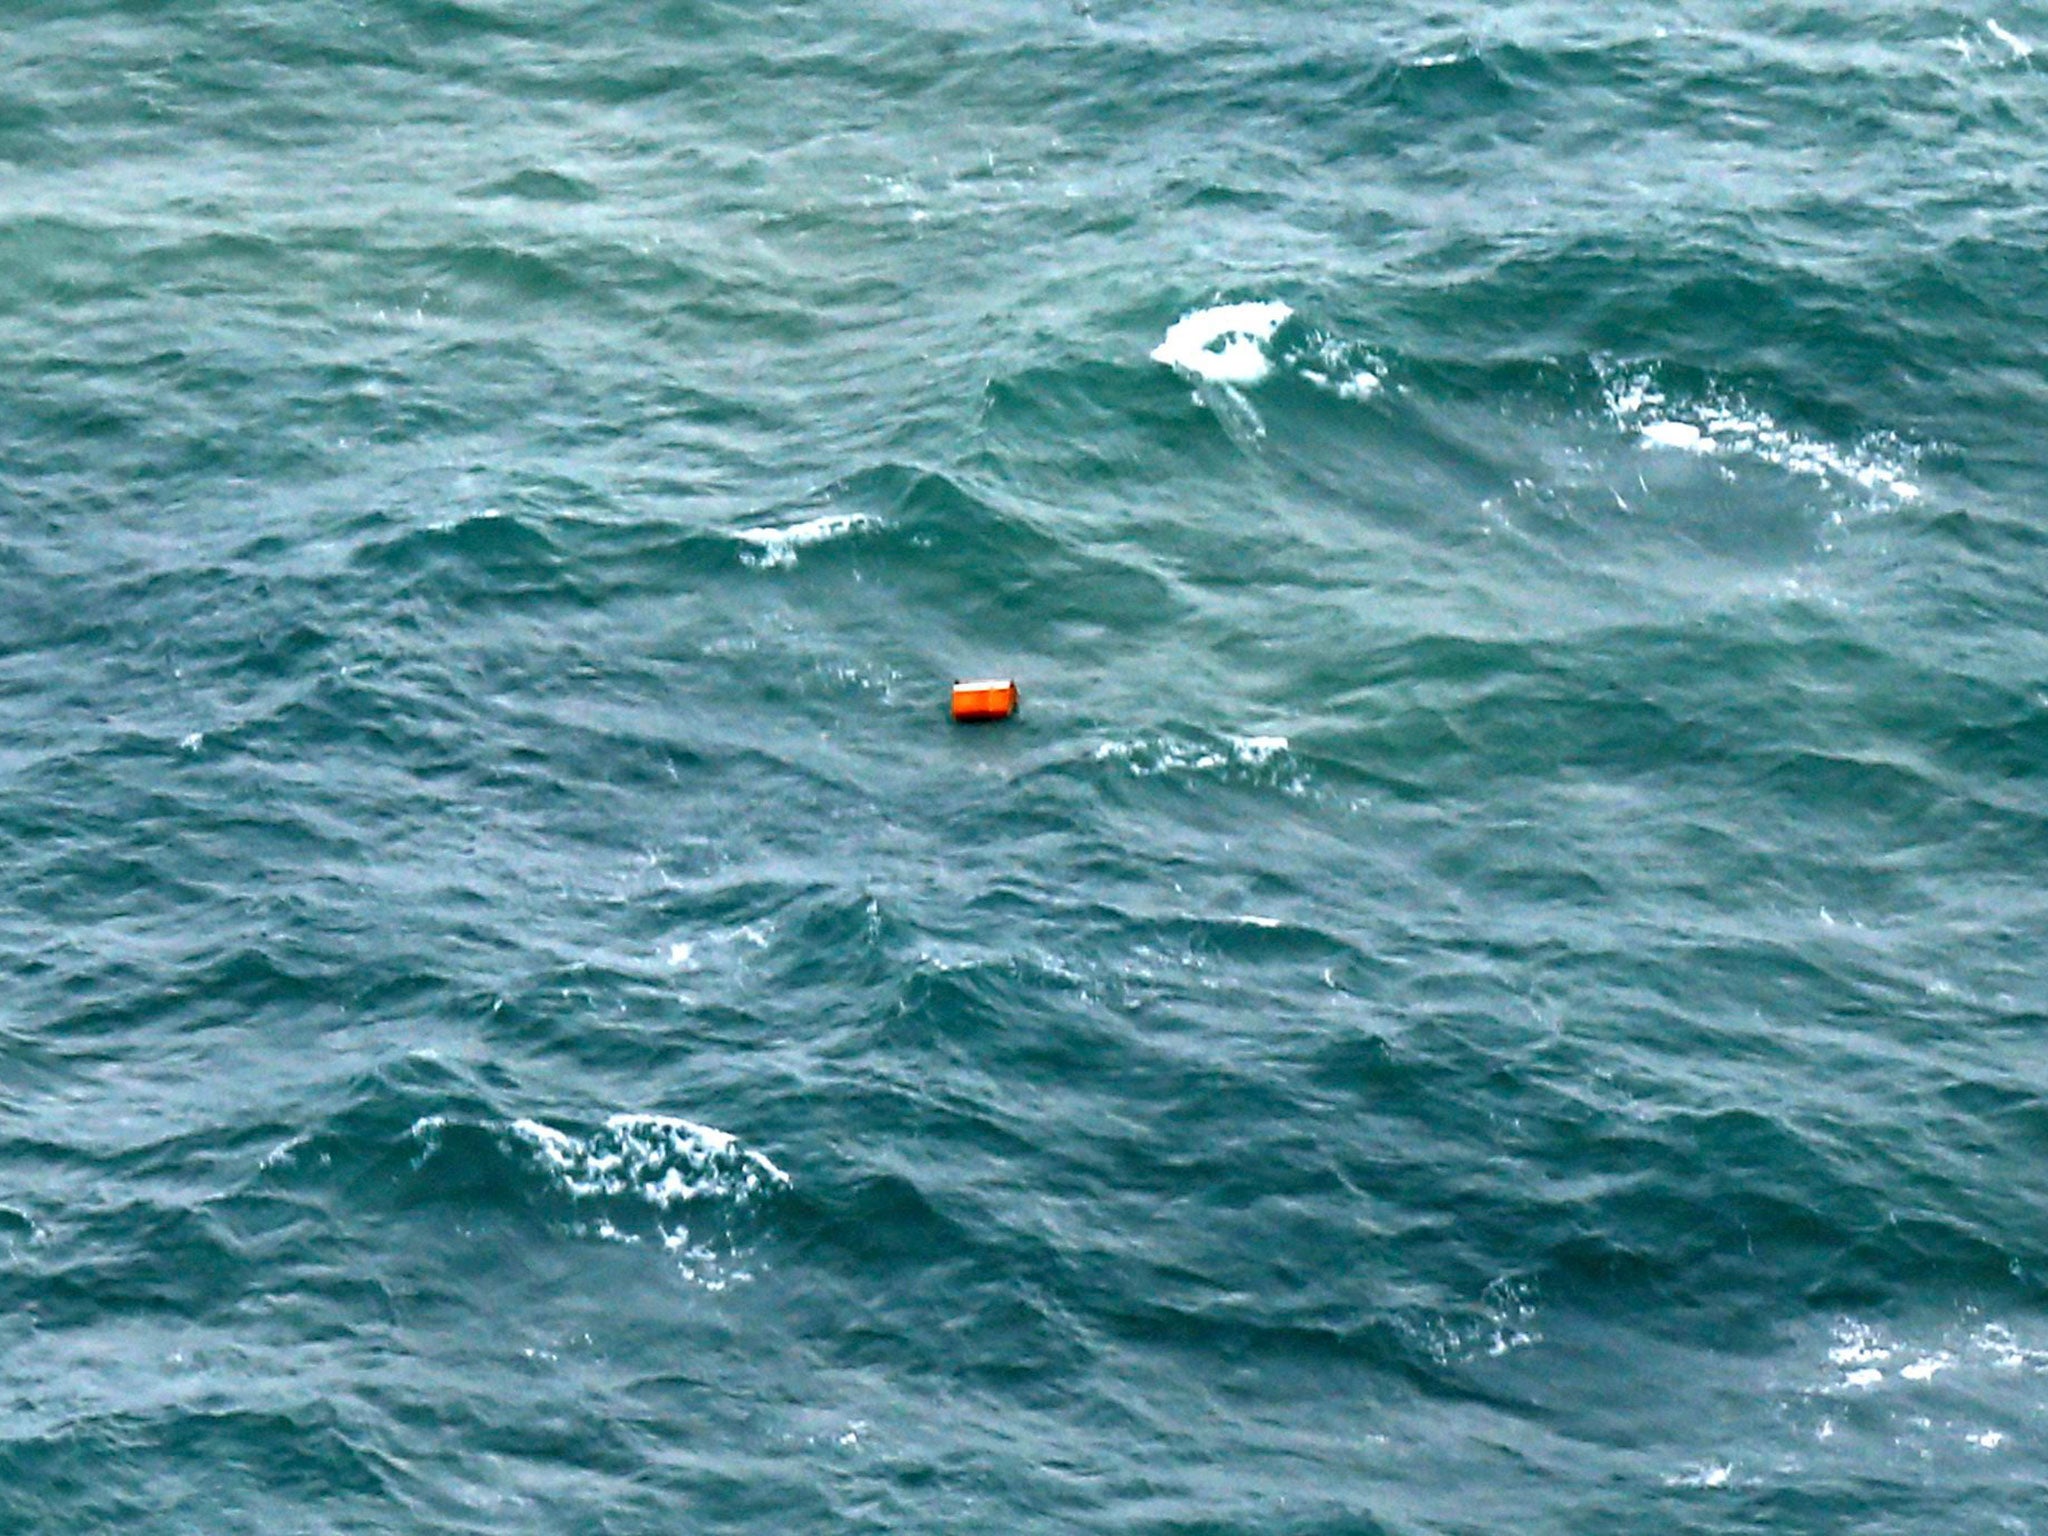 An unidentified object, found during a search and rescue operation by the Indonesian Air Force for the missing AirAsia plane, is seen floating in the ocean off the coast of Pangkalan Bun, Borneo, Indonesia